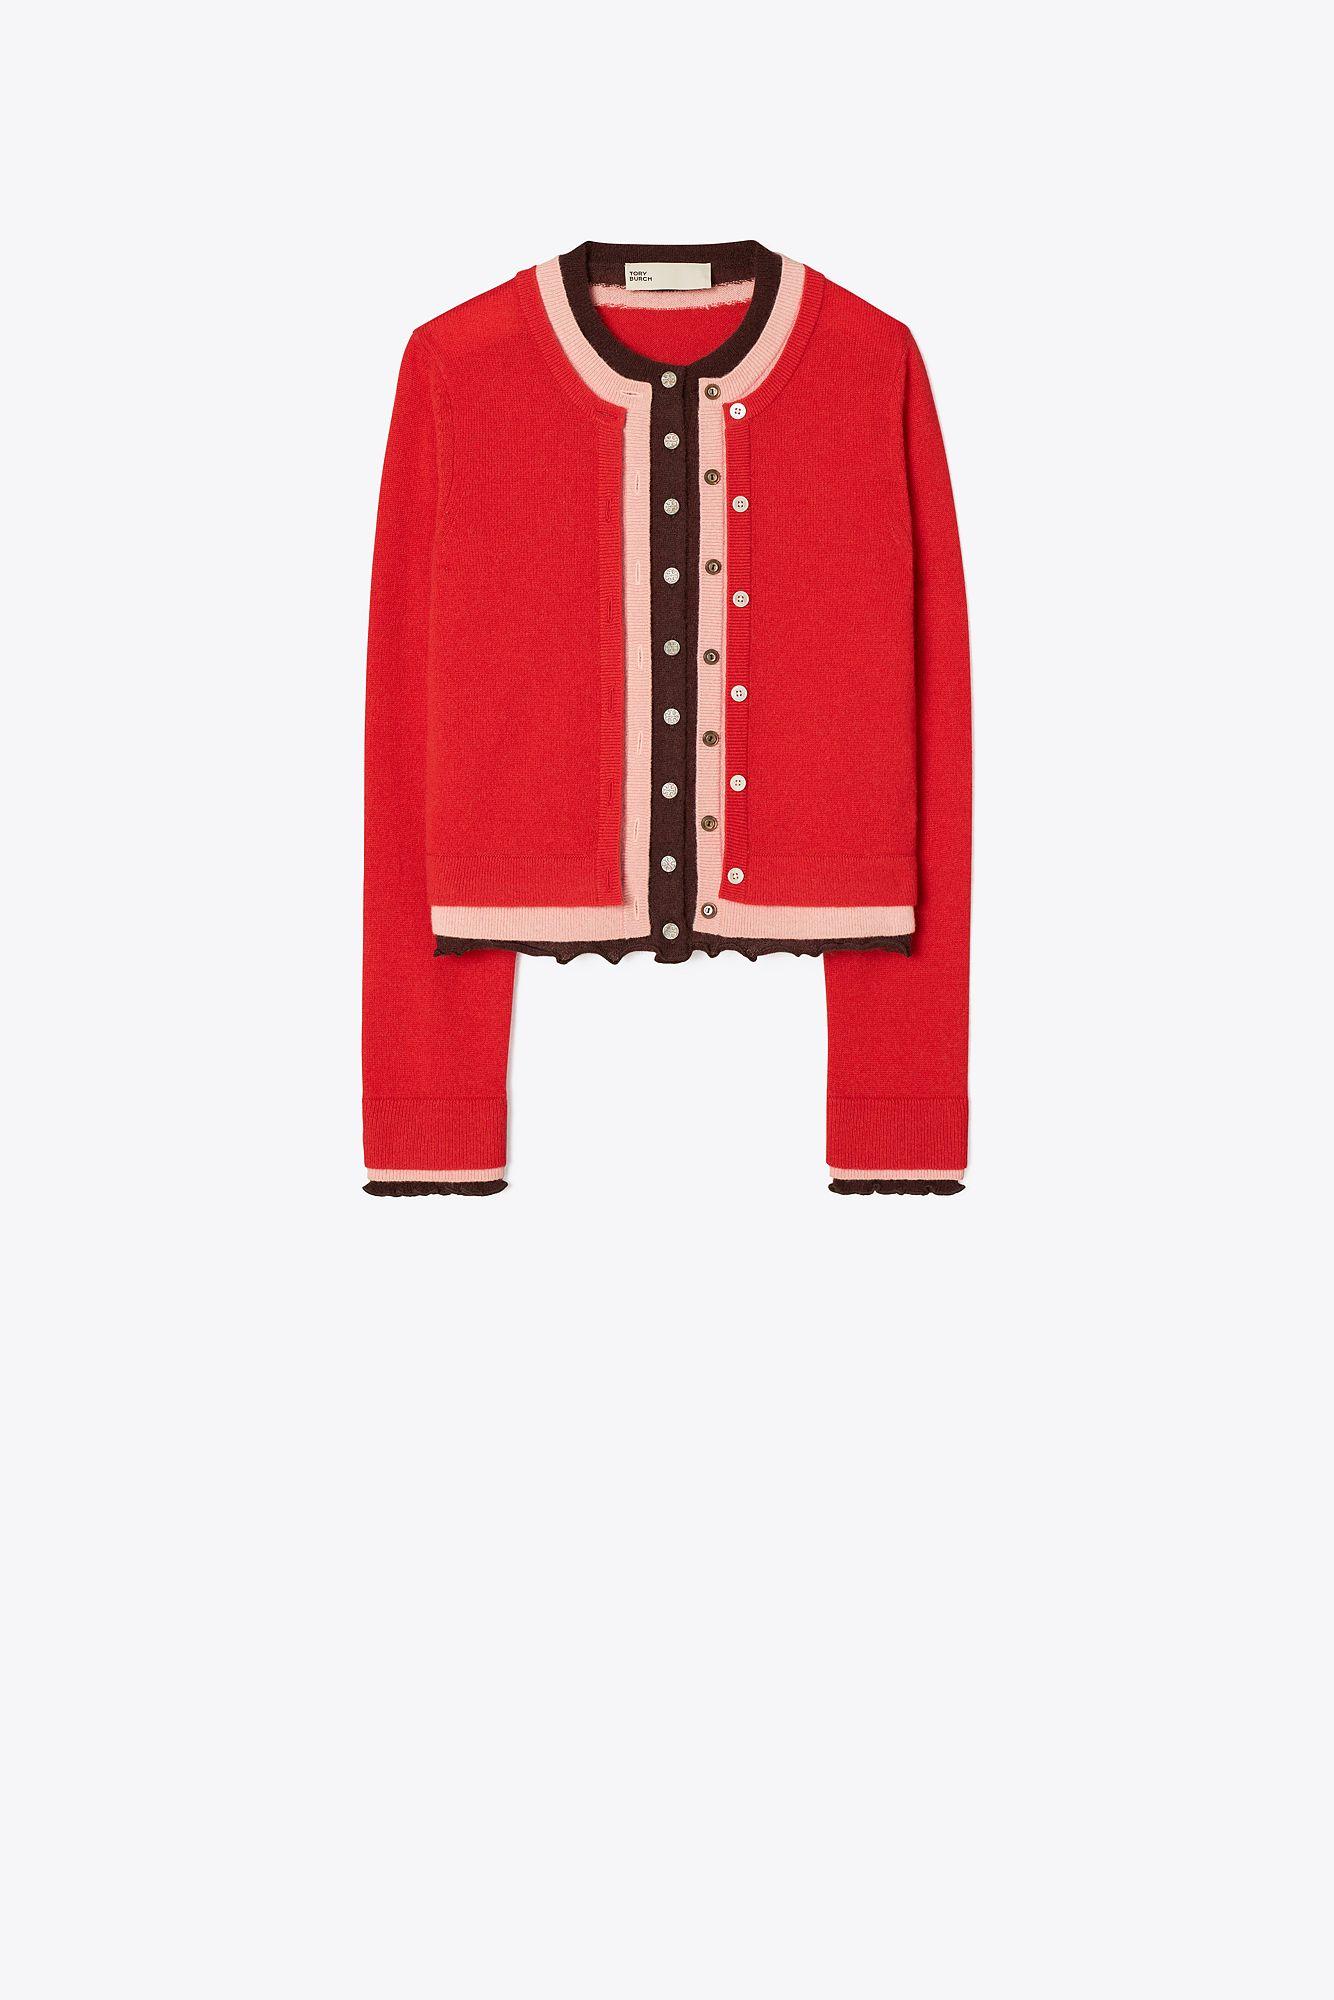 Tory Burch Triple Layer Cashmere Cardigan in Red | Lyst